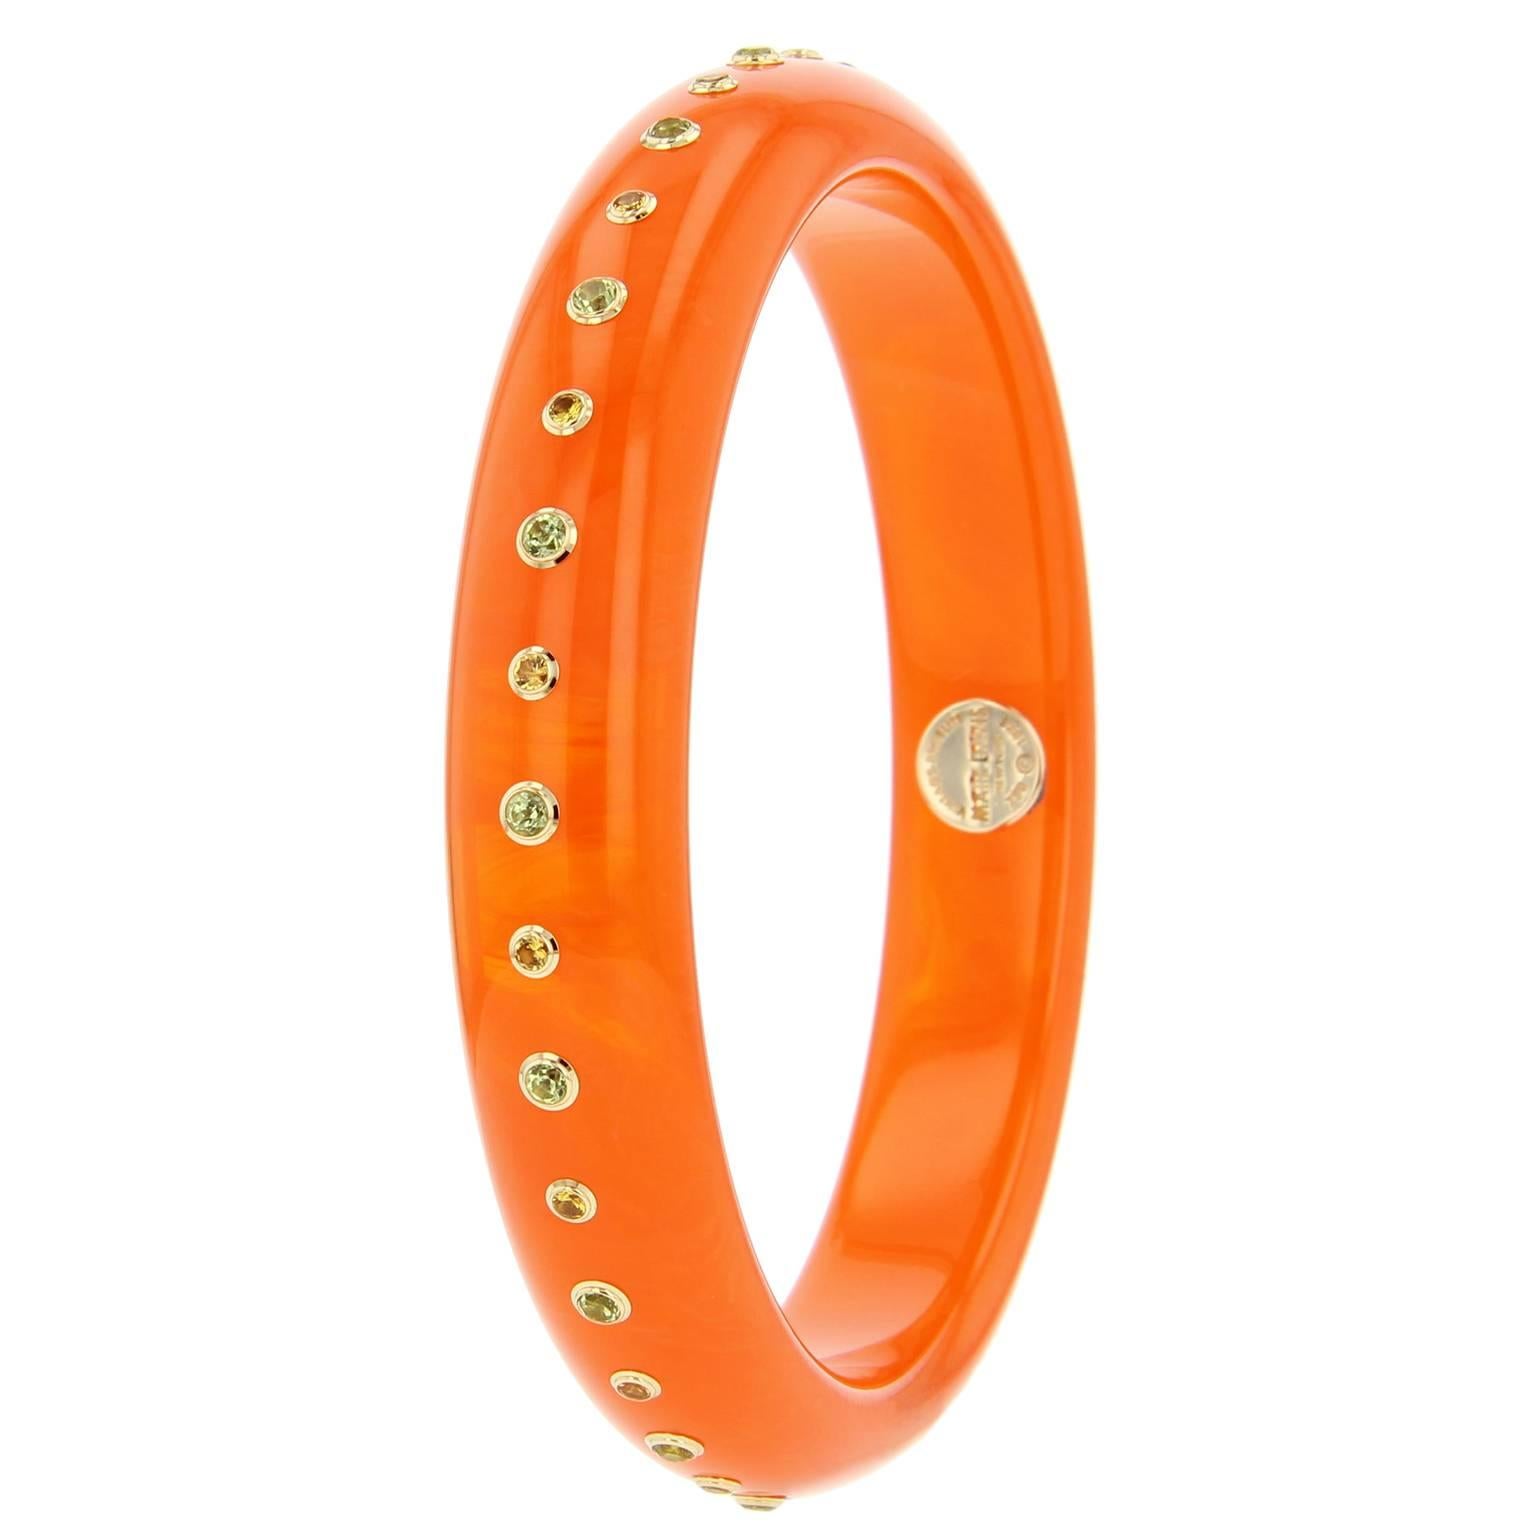 This fiery bangle is part of the Mark Davis Bakelite Collection. It was handcrafted using translucent orange vintage bakelite and studded with peridot and fine yellow sapphire, bezel-set in 18k yellow gold.    

Full details below: 
• From the Mark